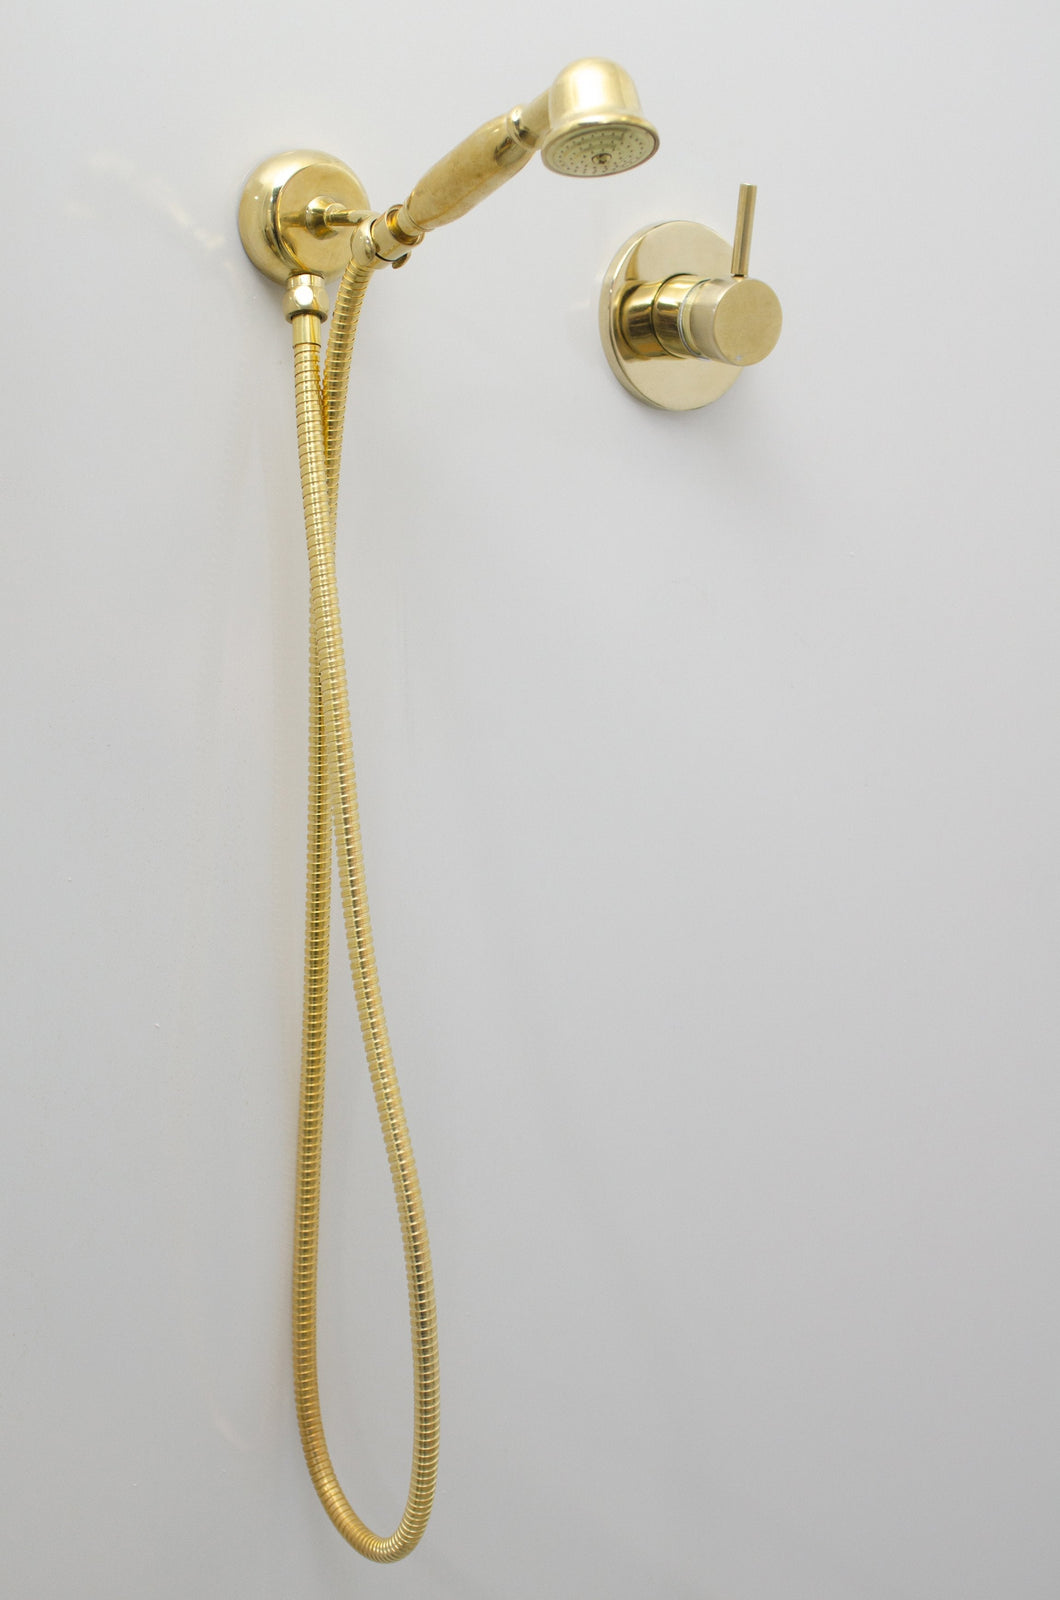 Brass Handheld Shower Head - Wall Mounted Shower System